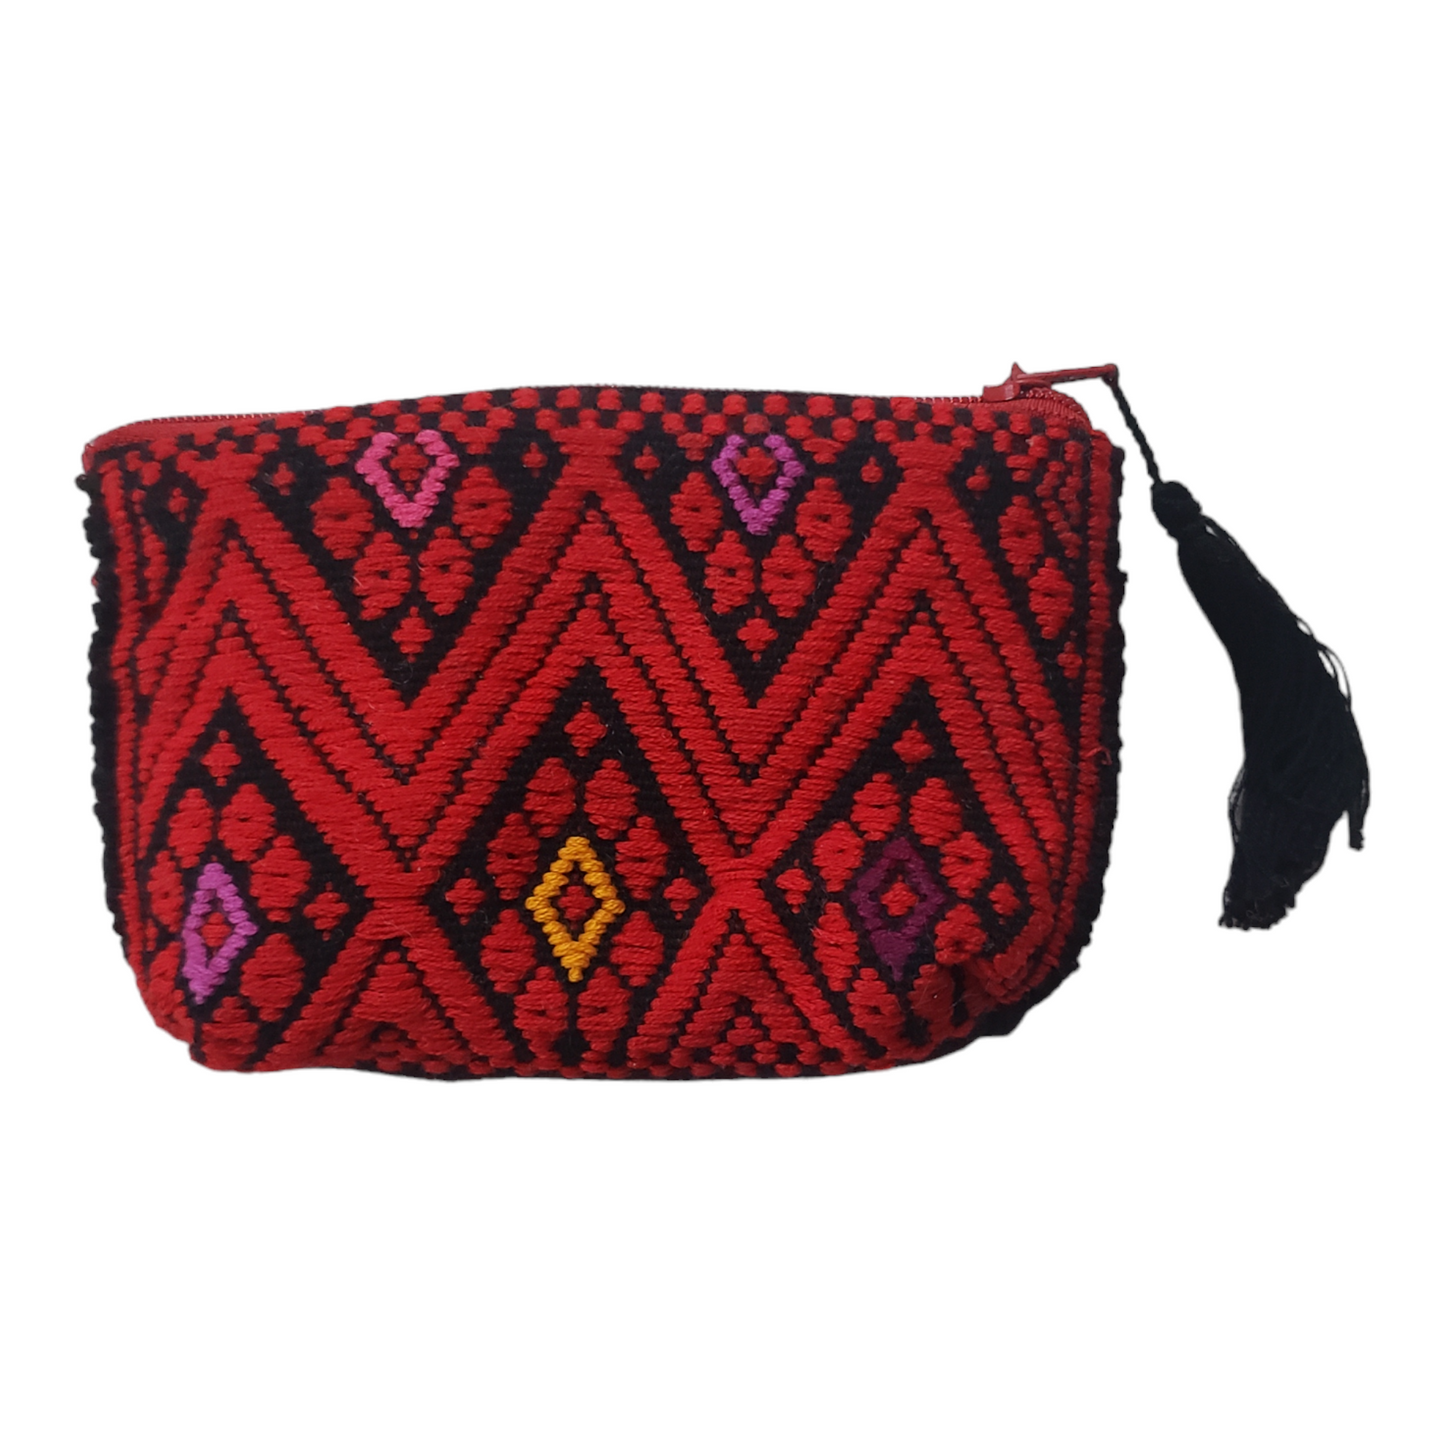 Embroidered Pouch from Chiapas Mexico